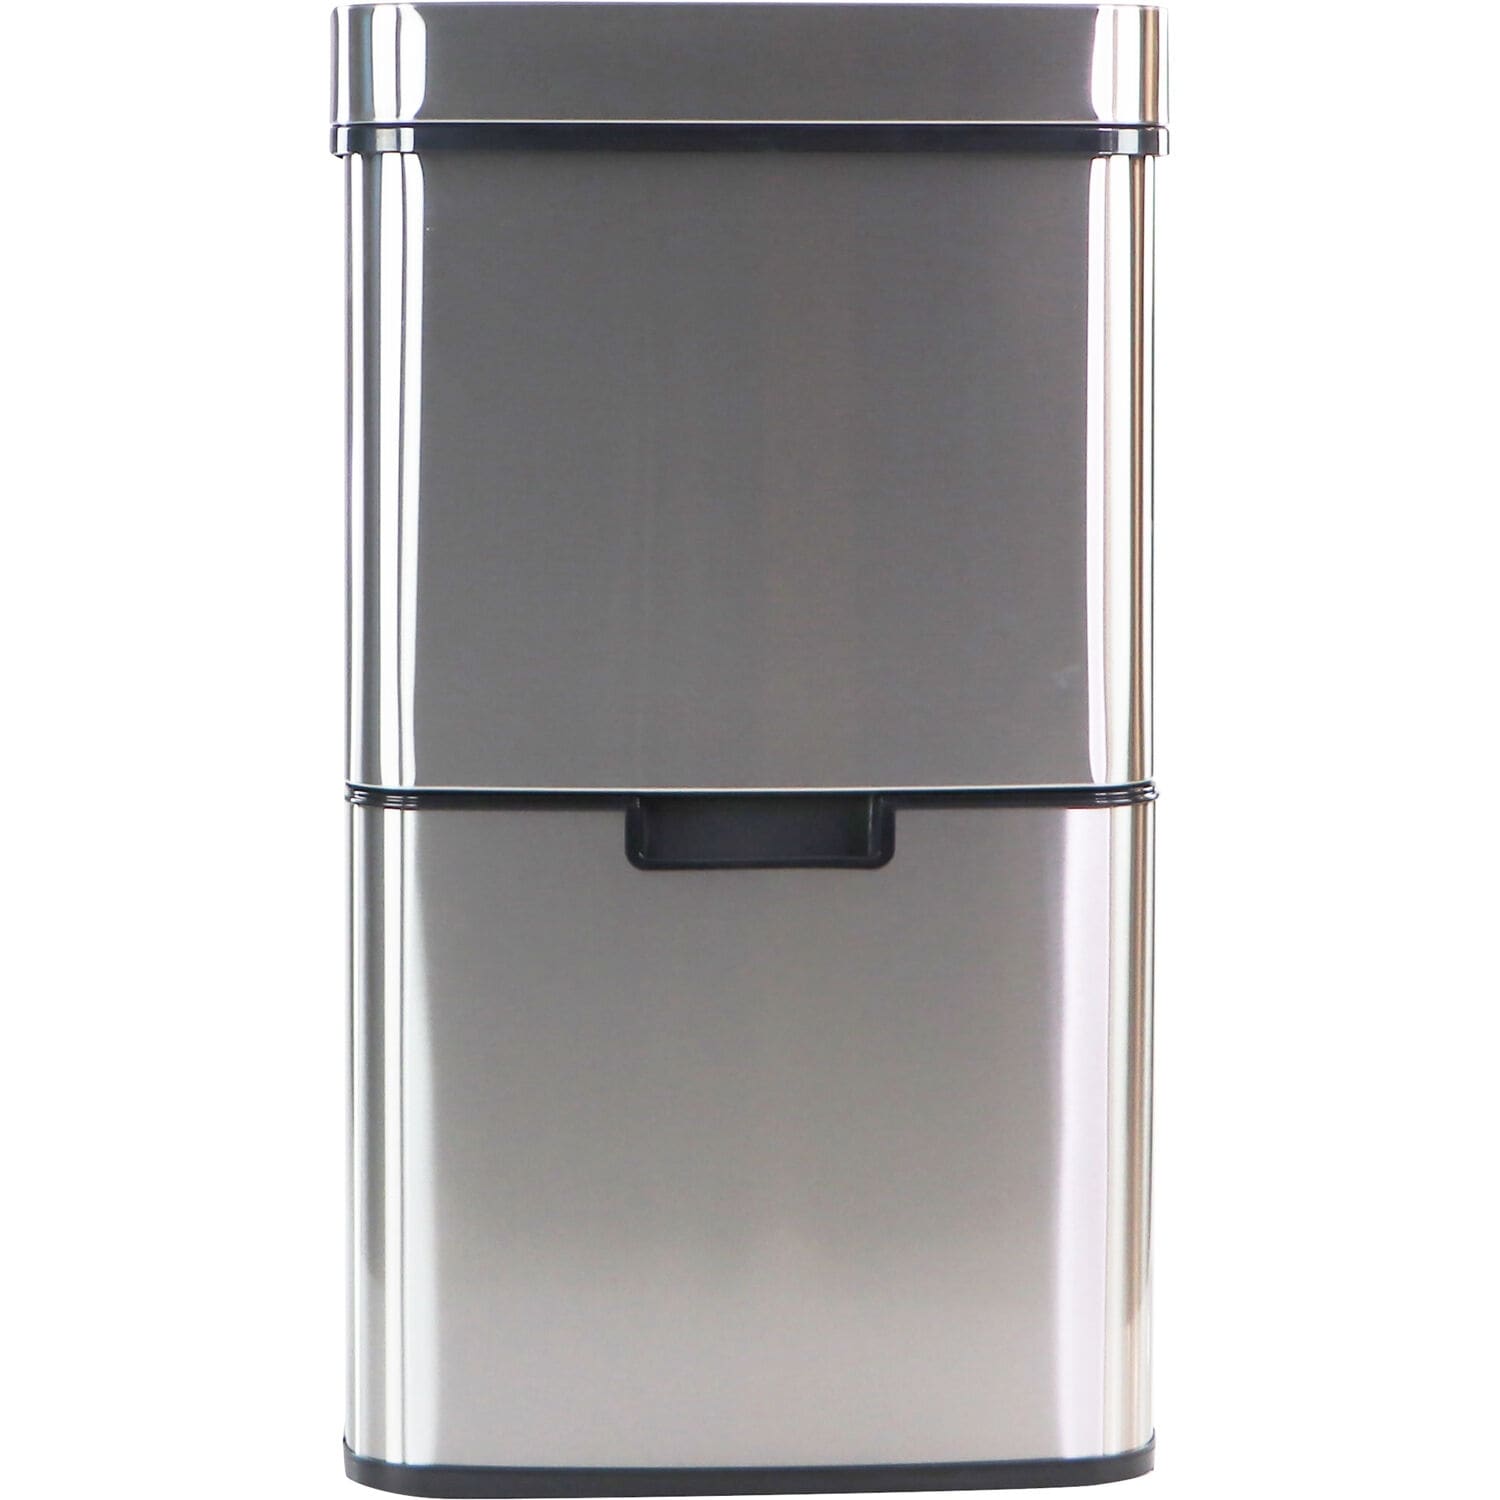 13 Gallon Stainless Steel Dual Kitchen Trash Can Home Zone Living